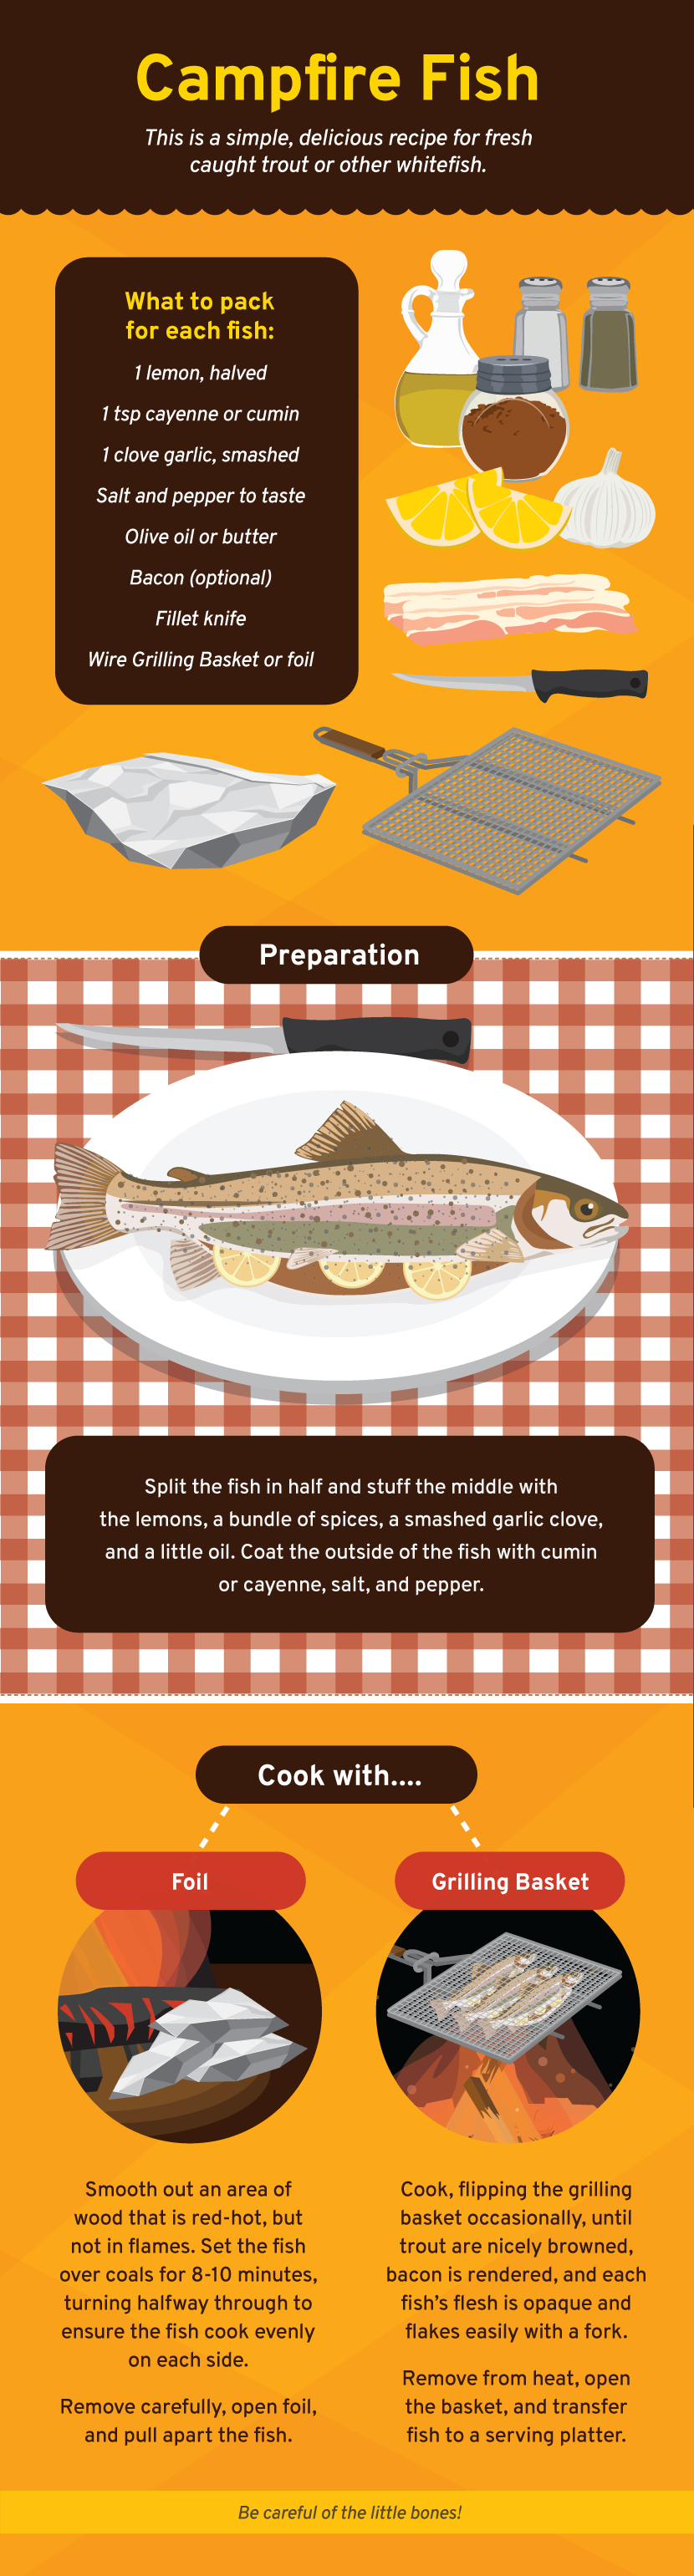 Campfire Fish - Cooking on a Campfire